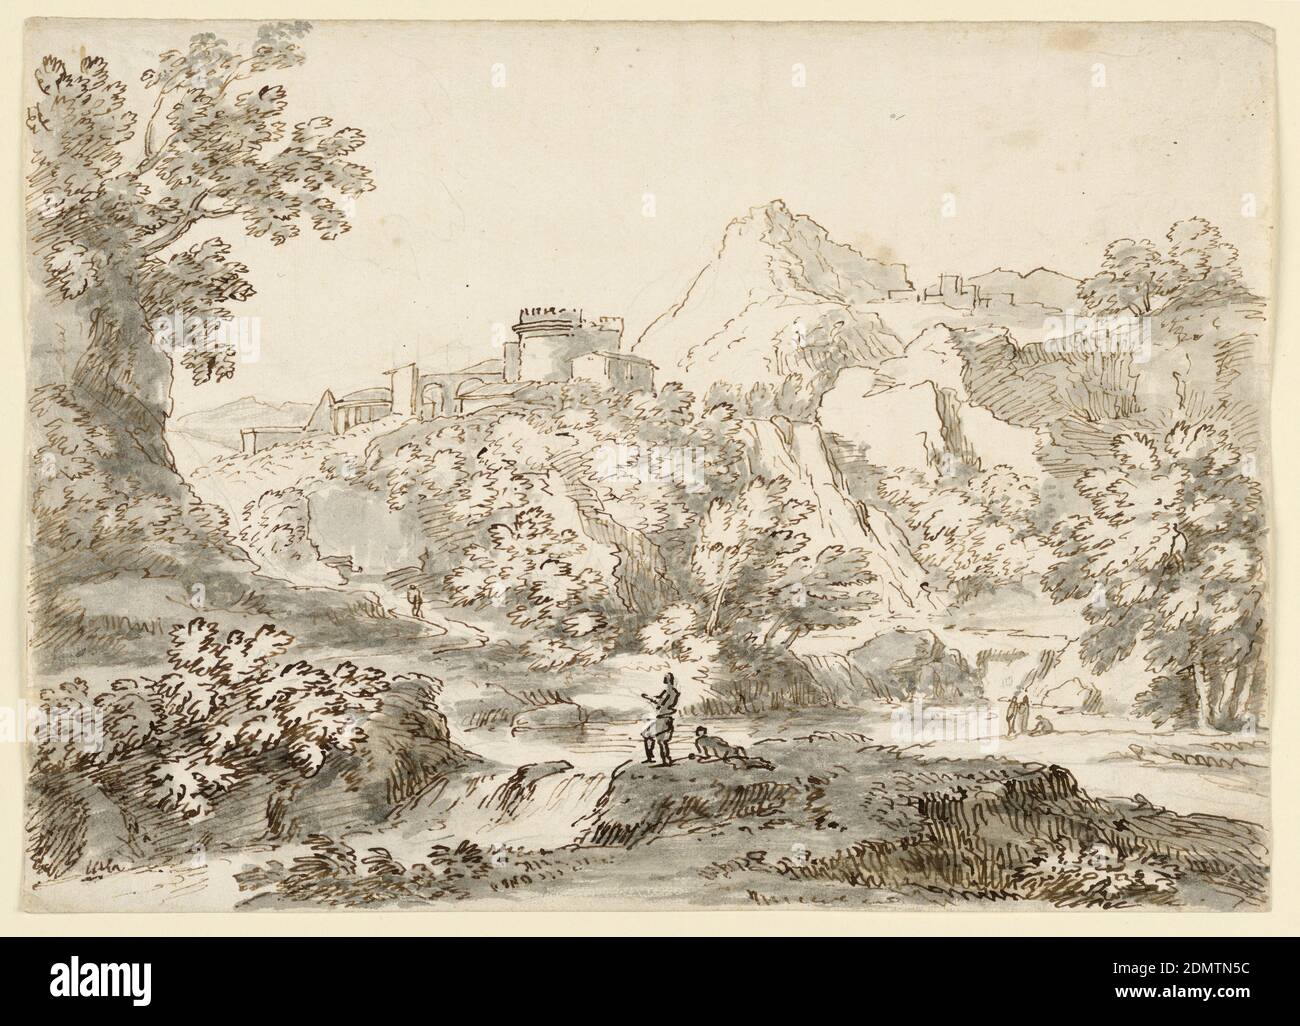 A Landscape with Town, Carlo Marchionni, Italian, 1702–1786, Pen and ink, brush and wash on paper, Mountainous country with figures beside a small waterfall in the foreground. In the background, a town with a crenelated castle before a looming outcrop., Italy, 1750–1770, landscapes, Drawing Stock Photo